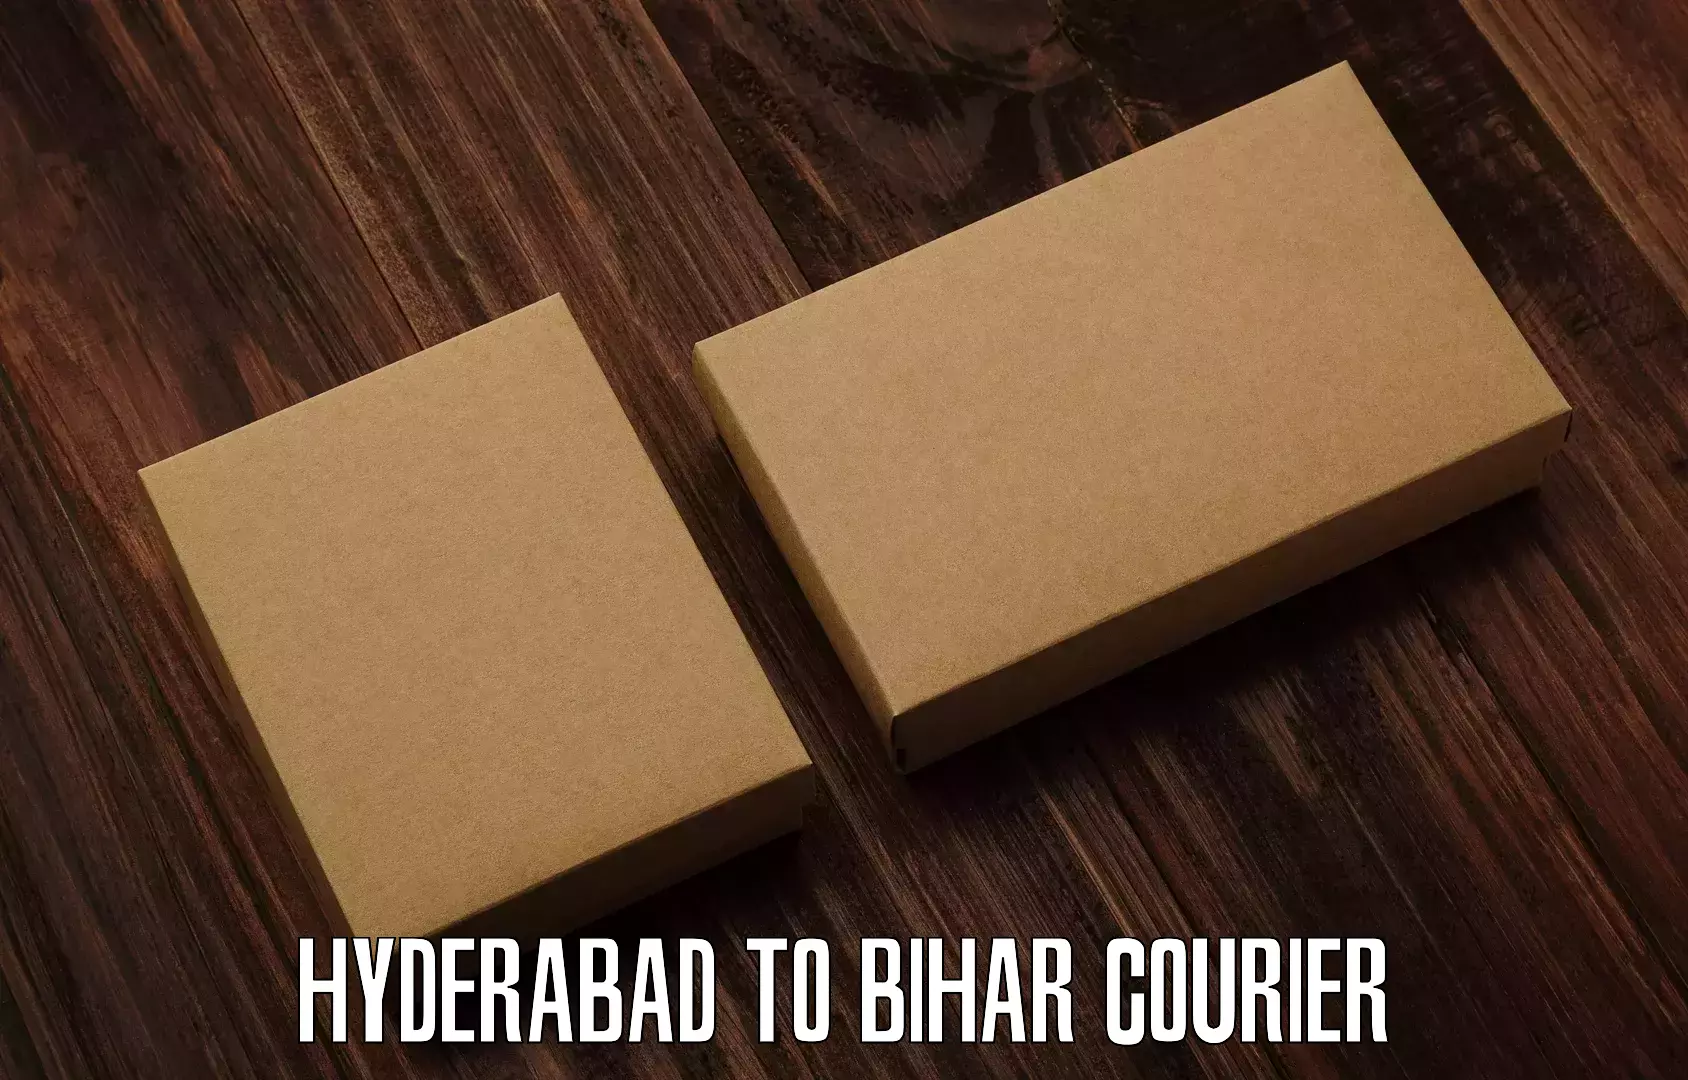 24-hour courier service Hyderabad to Rajgir